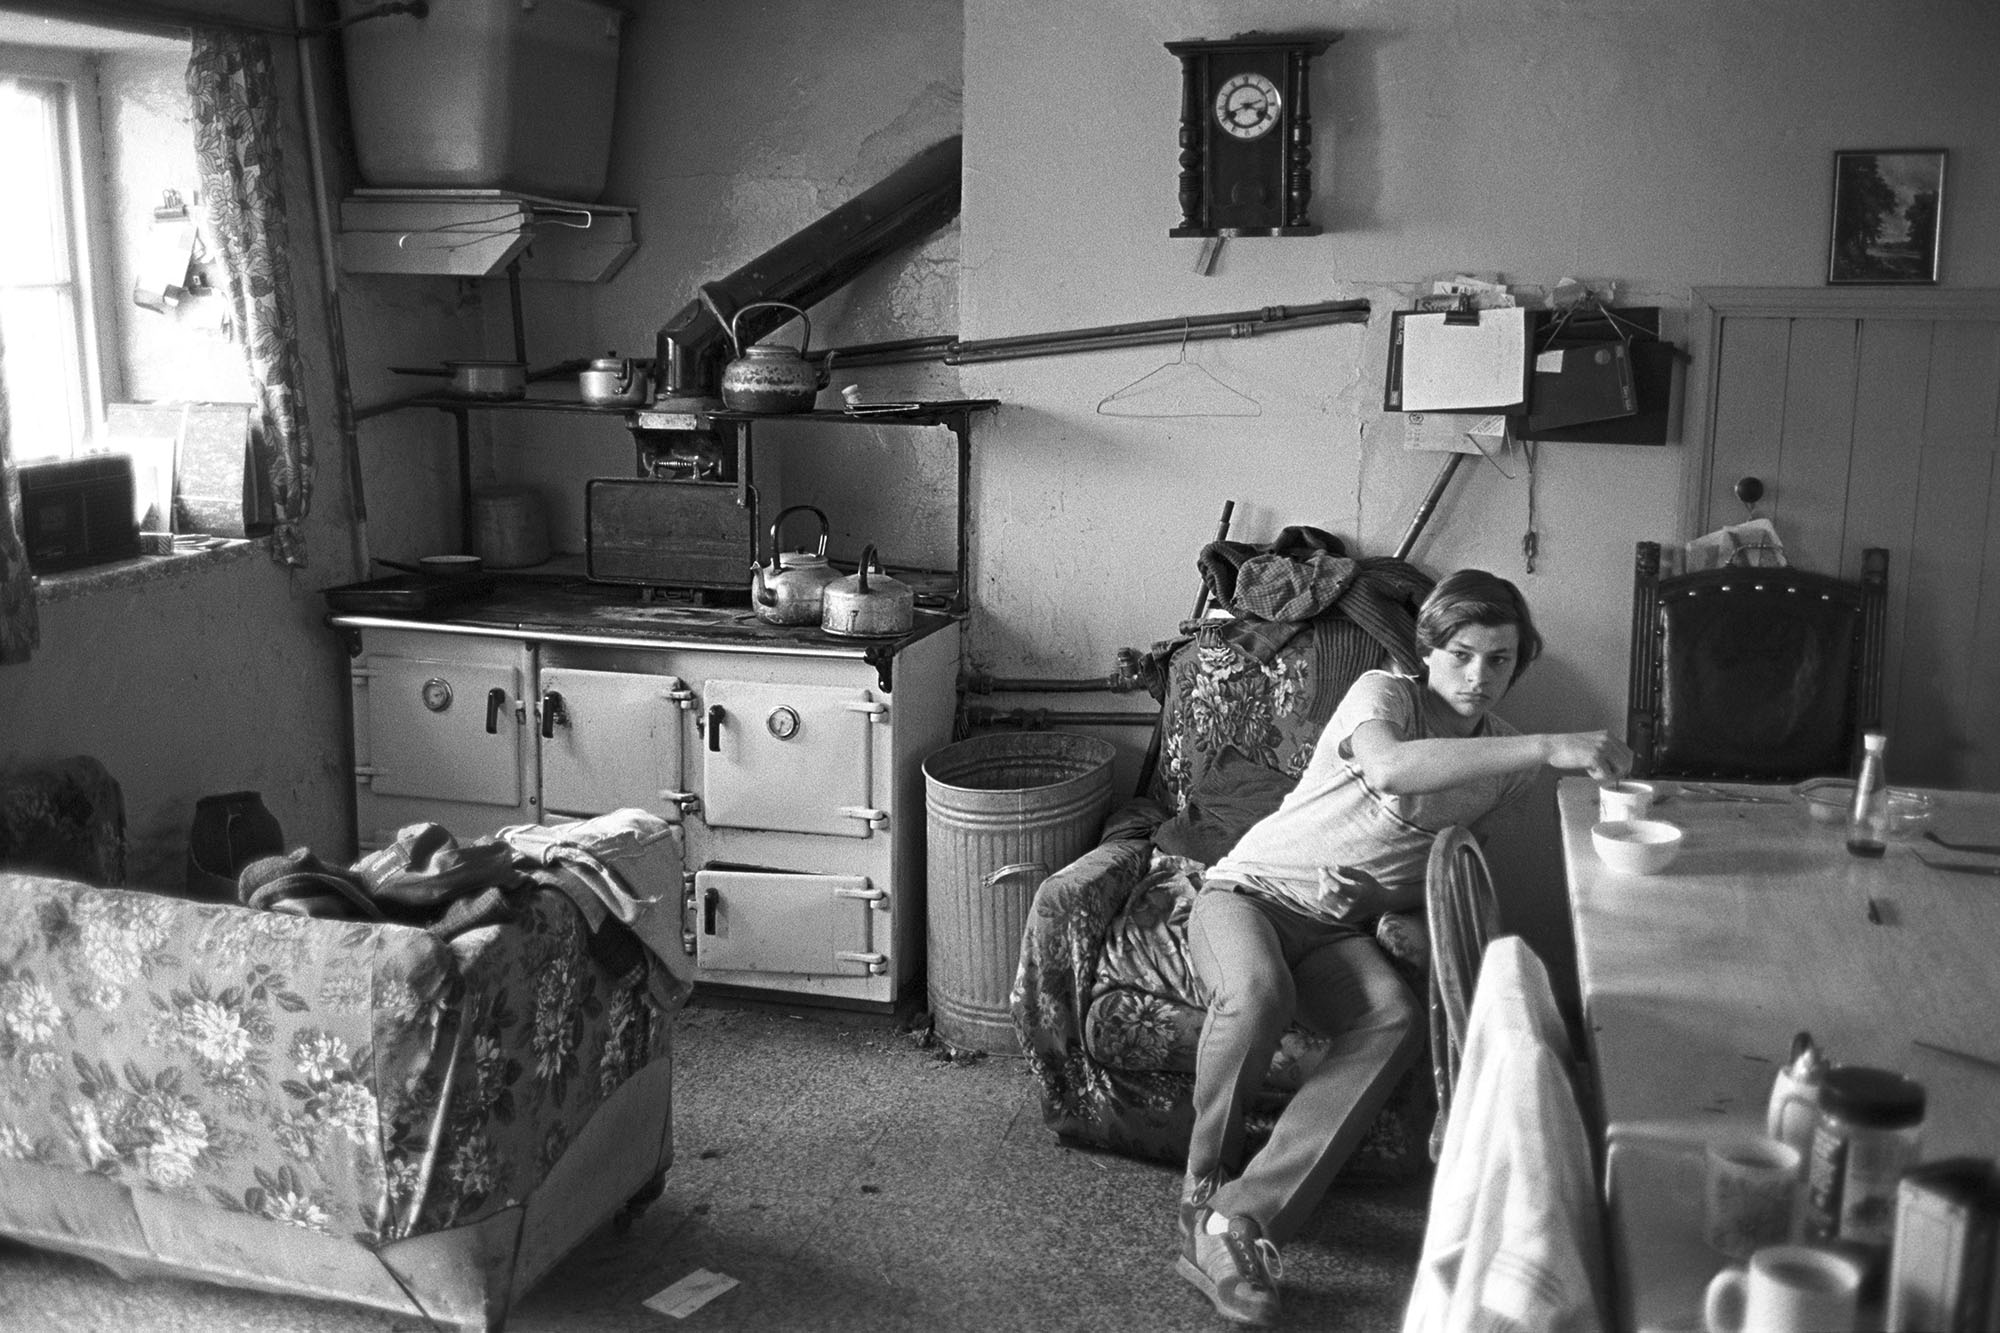 Man sitting in farmhouse kitchen having tea and watching cup final on television. 
[A young man from the French family sitting in his farmhouse kitchen at Brendon Barton, Exmoor, and watching the football Cup Final. His is stirring a mug of tea. In the background a sofa and rayburn stove is visible.]